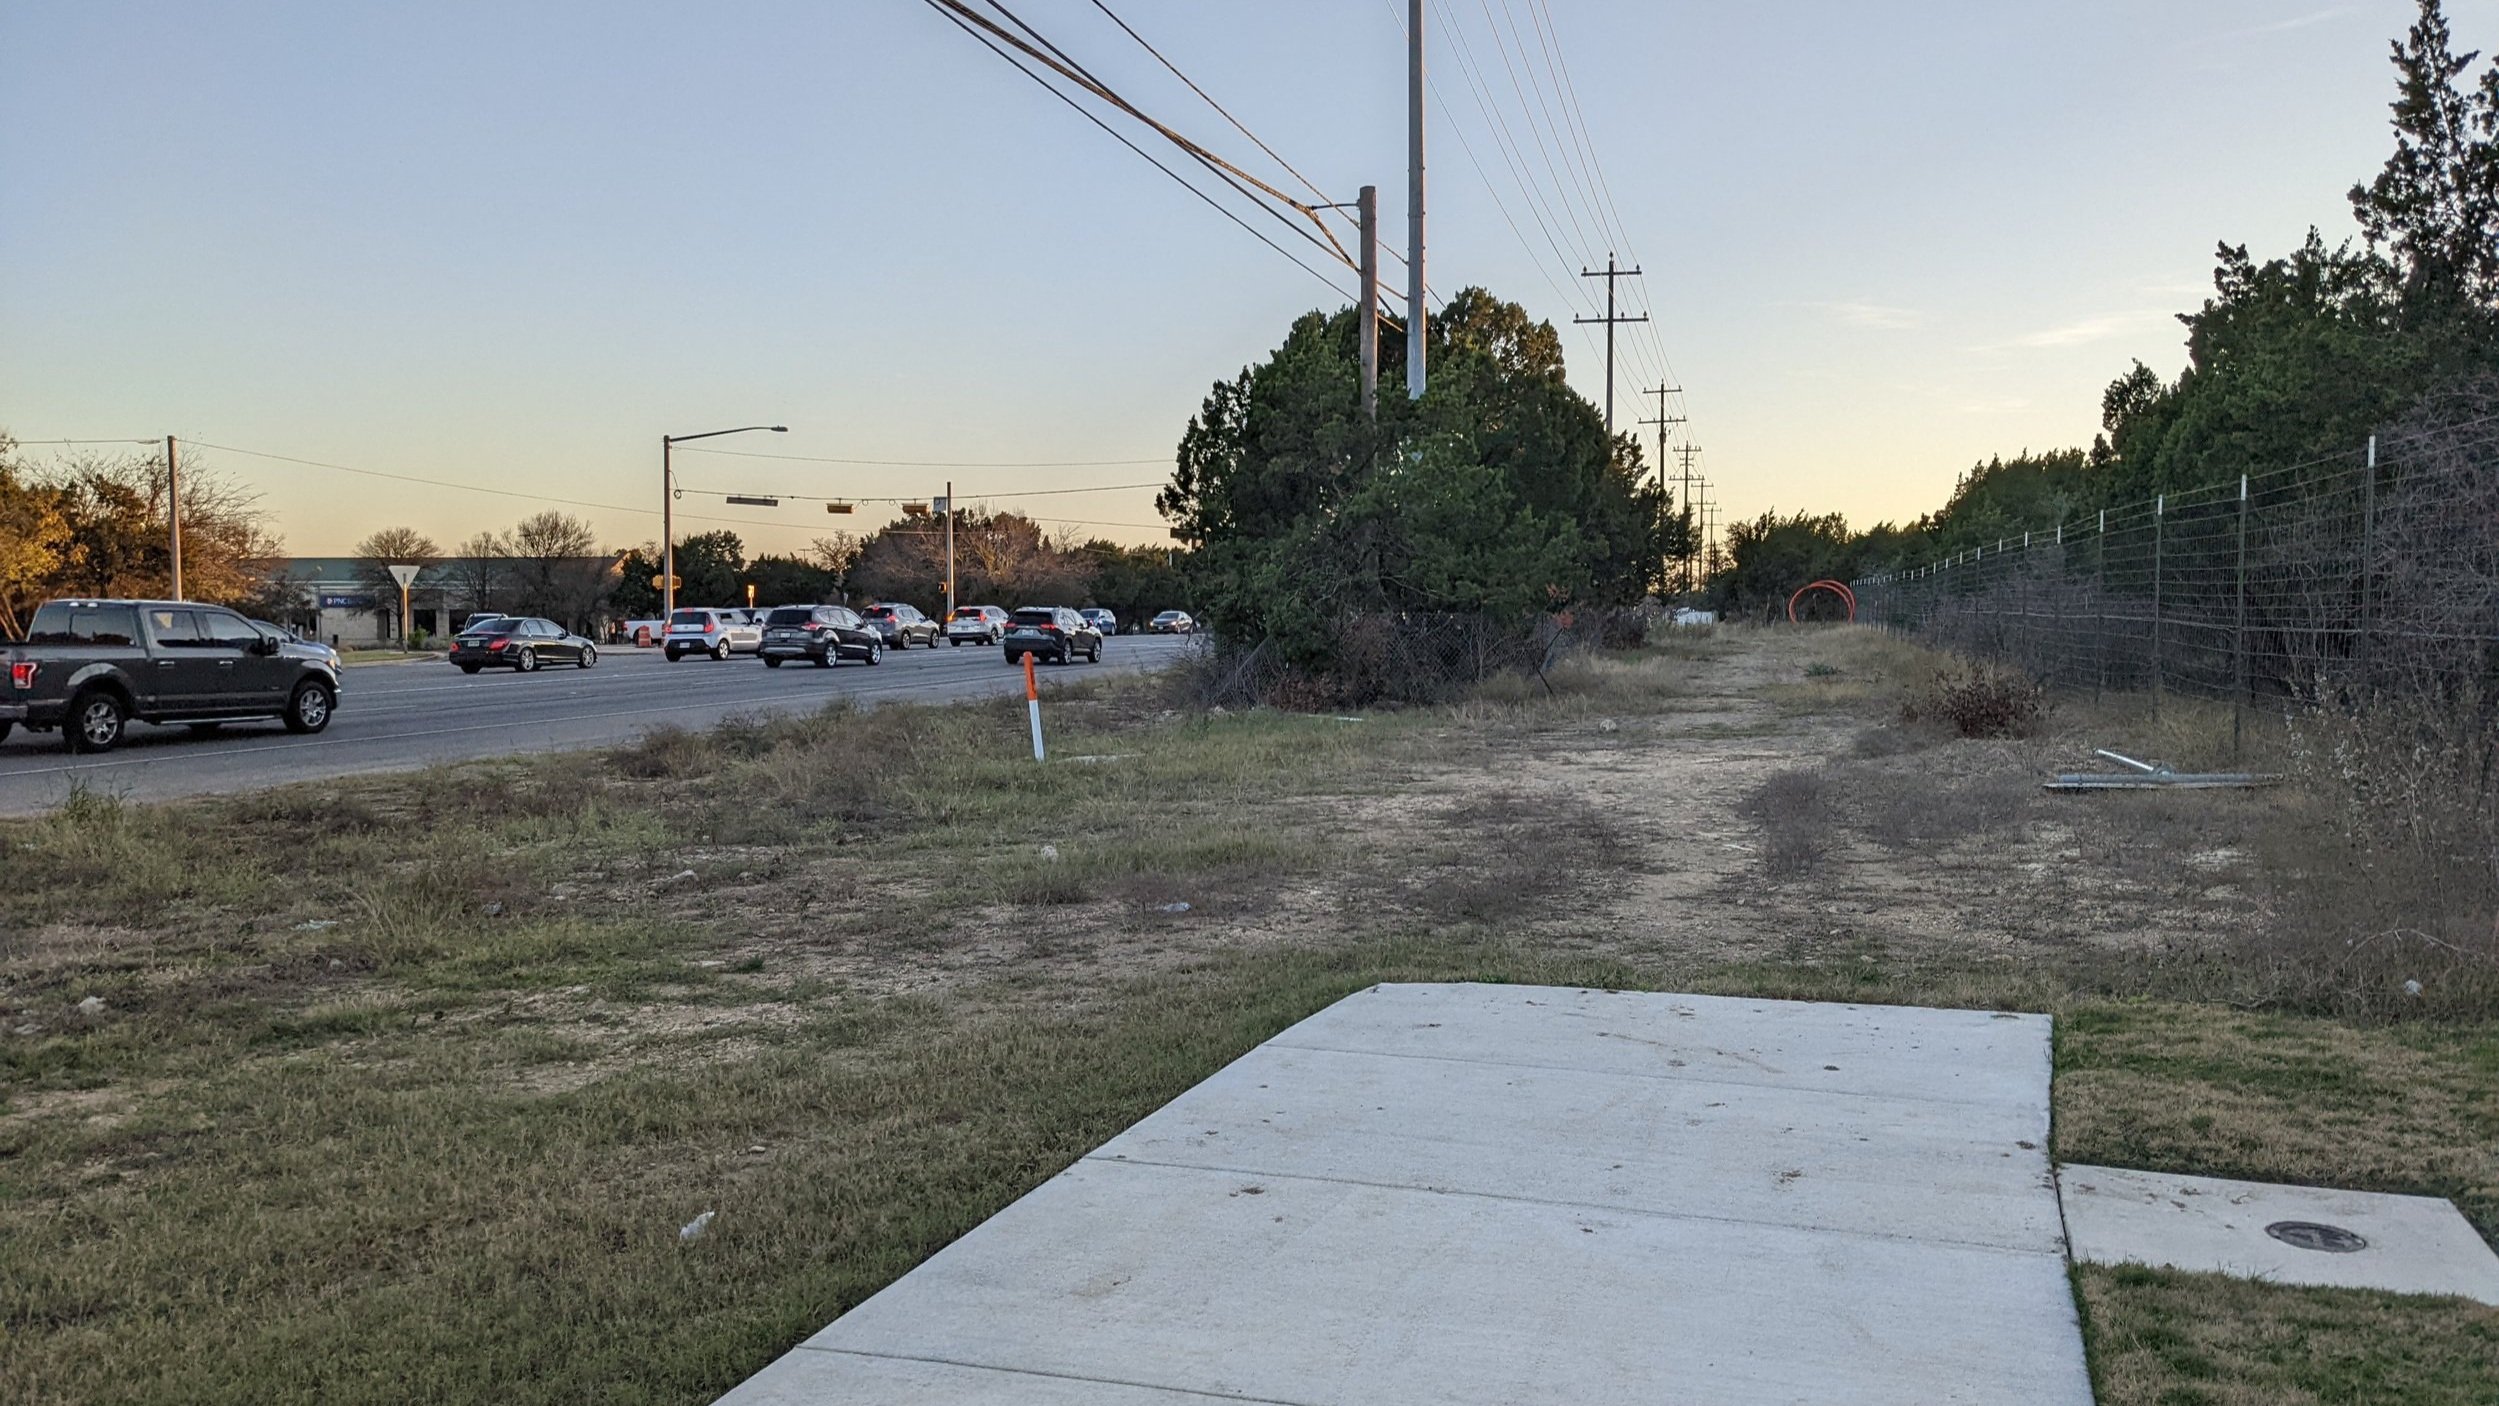  One of the few strips of sidewalk we have  is cut off  before we actually make it to the intersection. There is a beg button, but it’s surrounded by tall, prickly grass. 